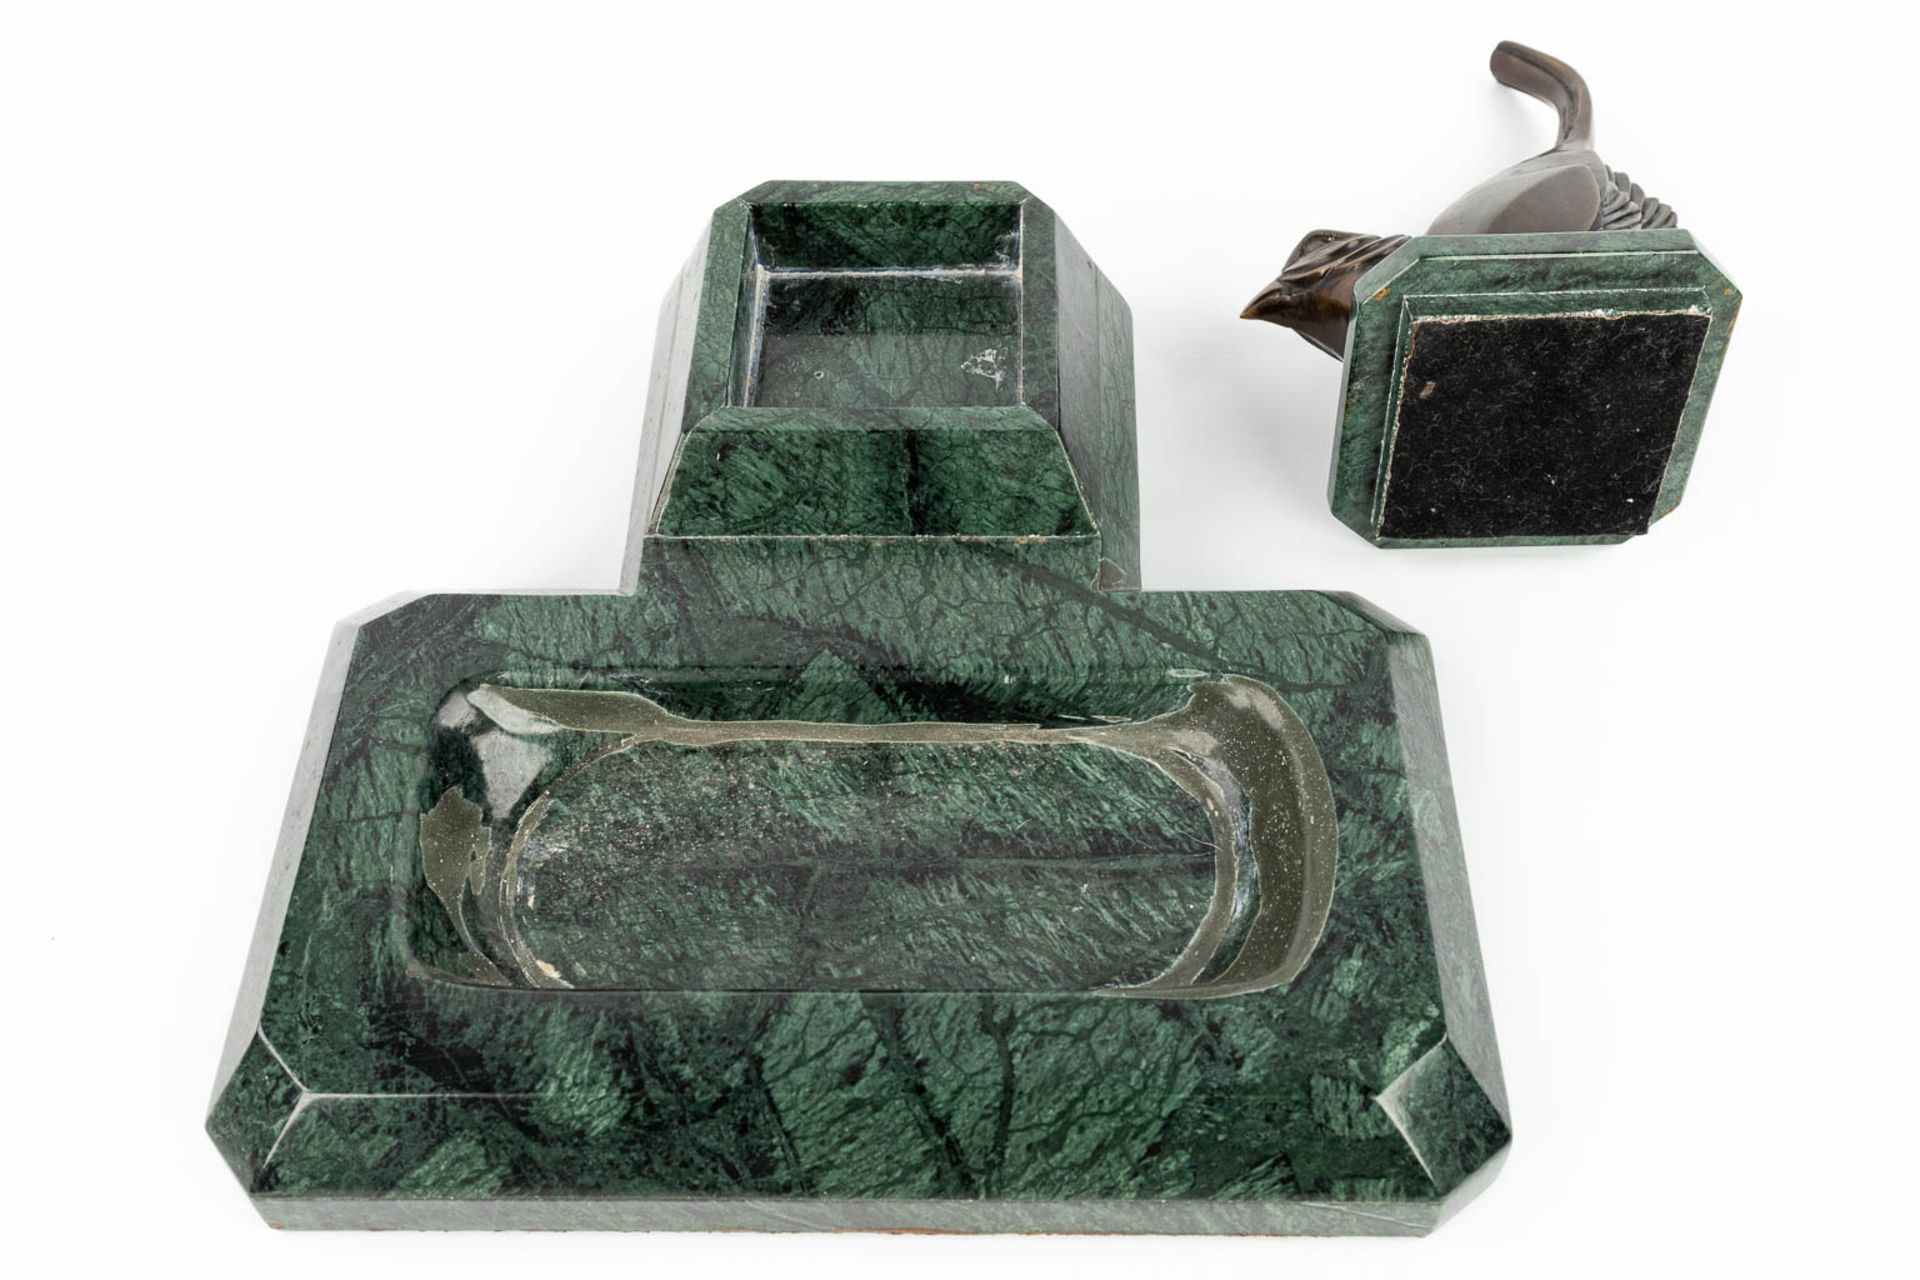 A 'Vide Poche' made of marble with a bird made of bronze in art deco style. - Image 9 of 10